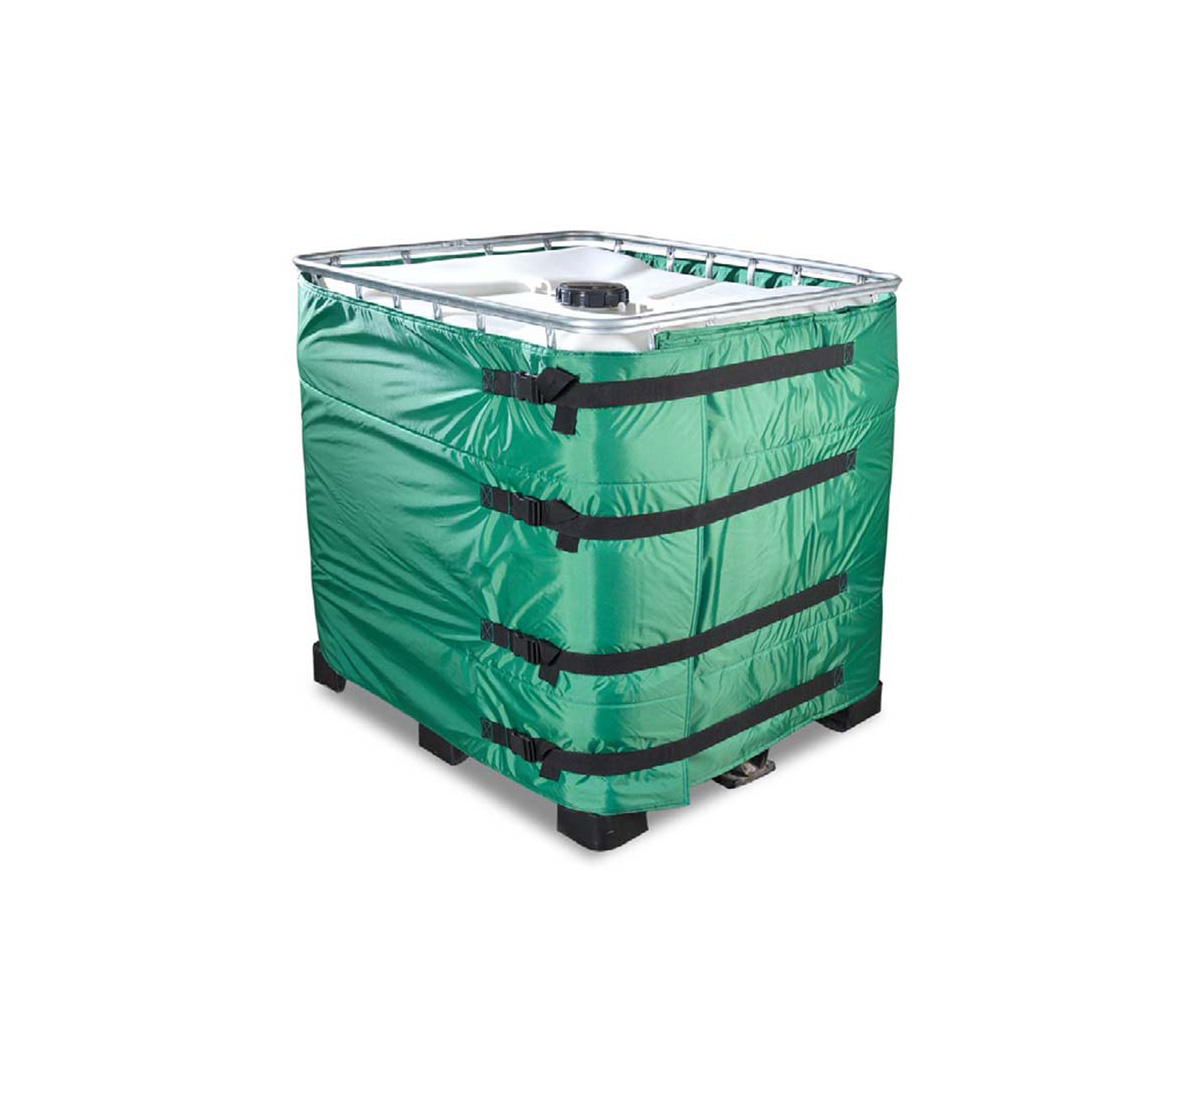 A picture of an Insulation body cover for IBC containers with casing of nylon